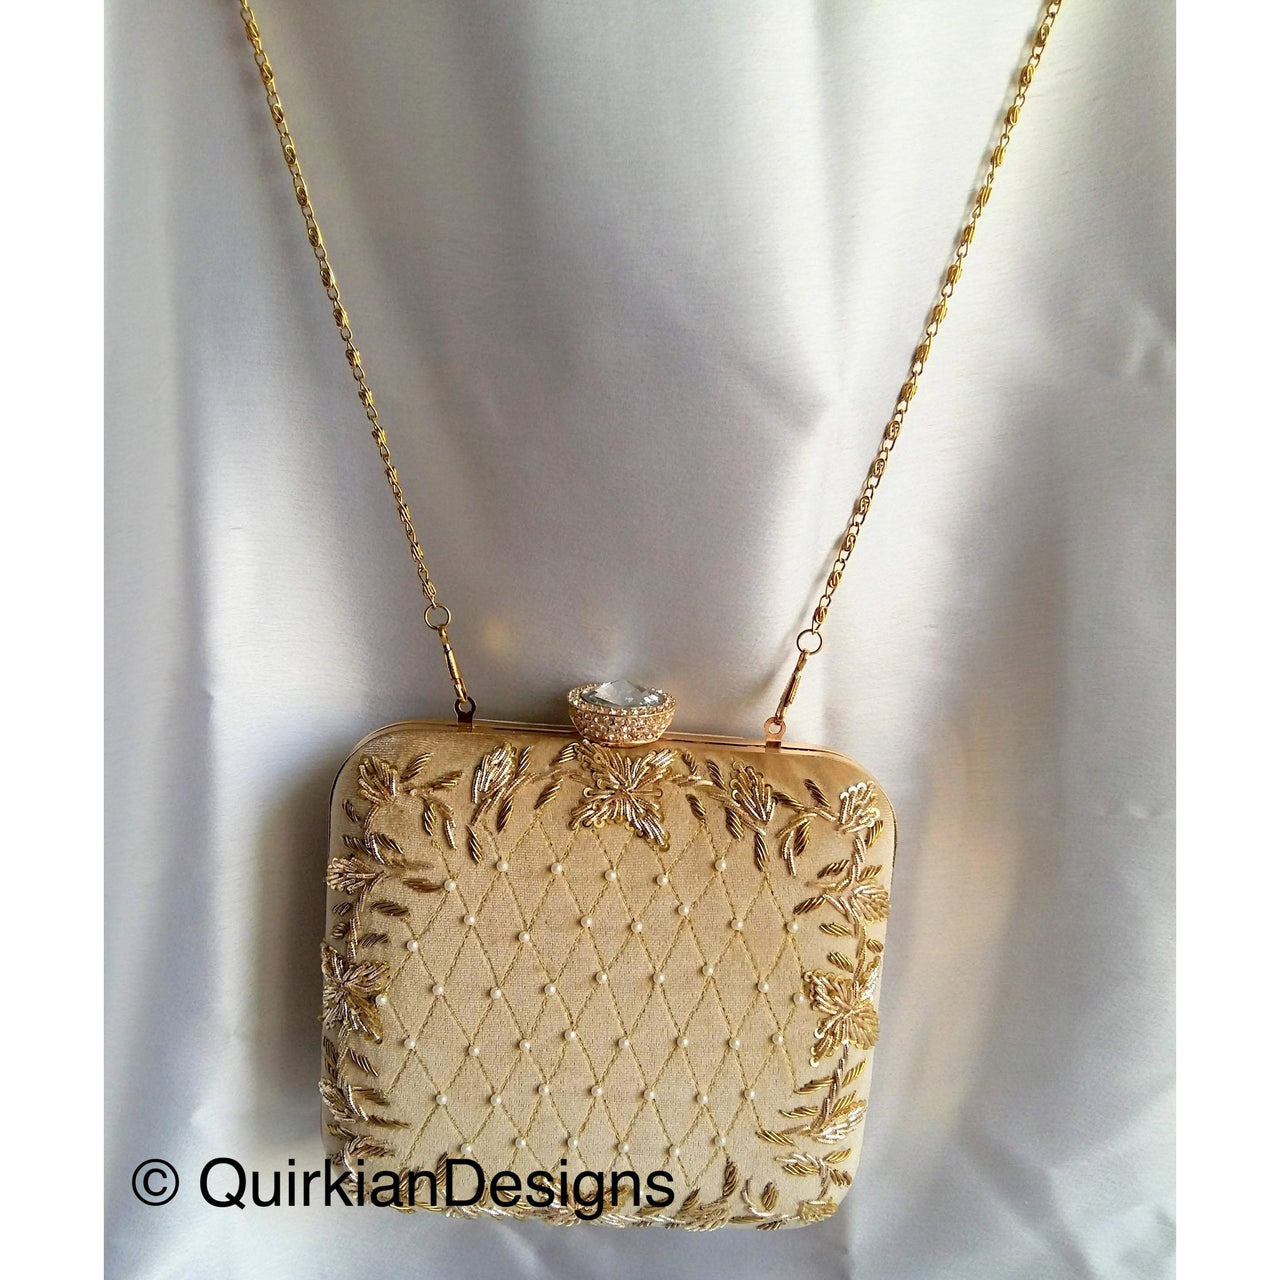 Beige Velvet Square Box Clutch With Intricate Floral Embroidery And Diamante Clasp, Wedding Clutch, Party Bag, Beaded Clutch